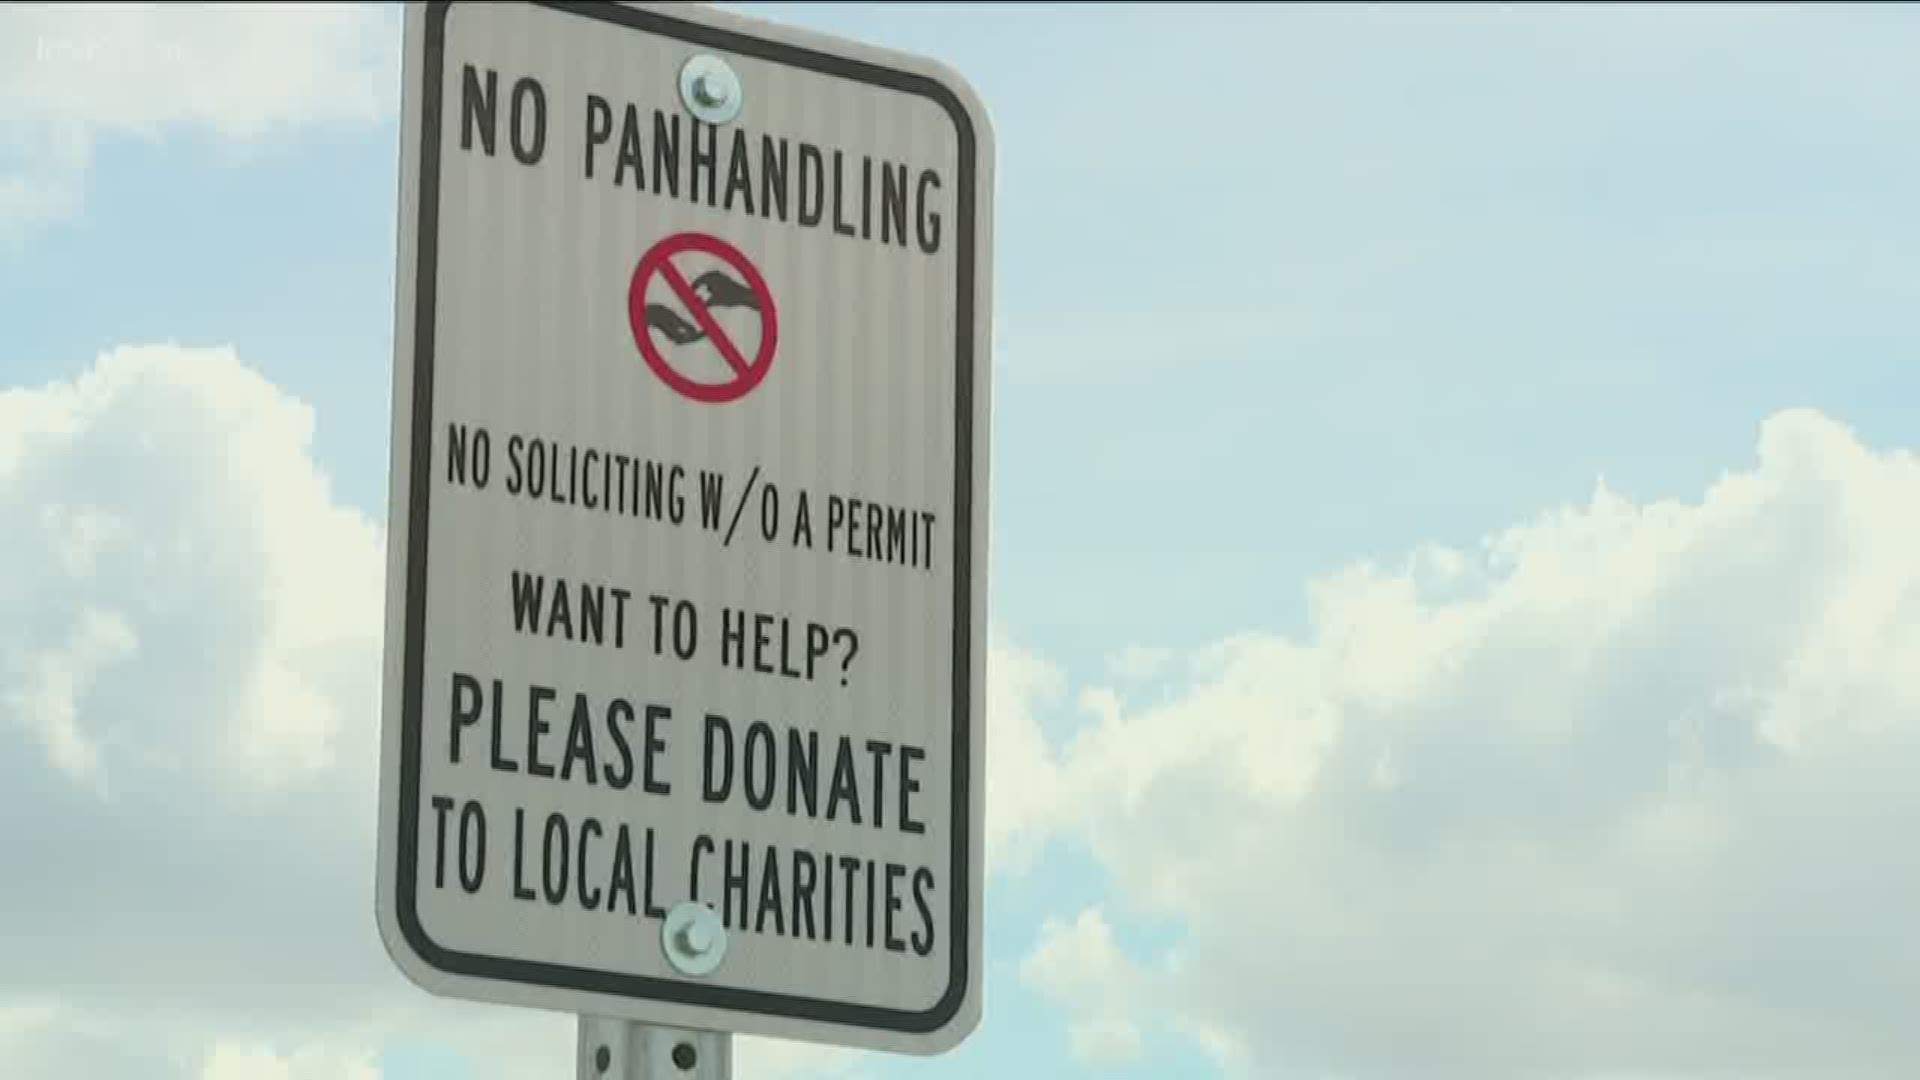 Recent anti-panhandling signs placed around the city of Nampa have many questioning the legality of the signs - and of panhandling in general.